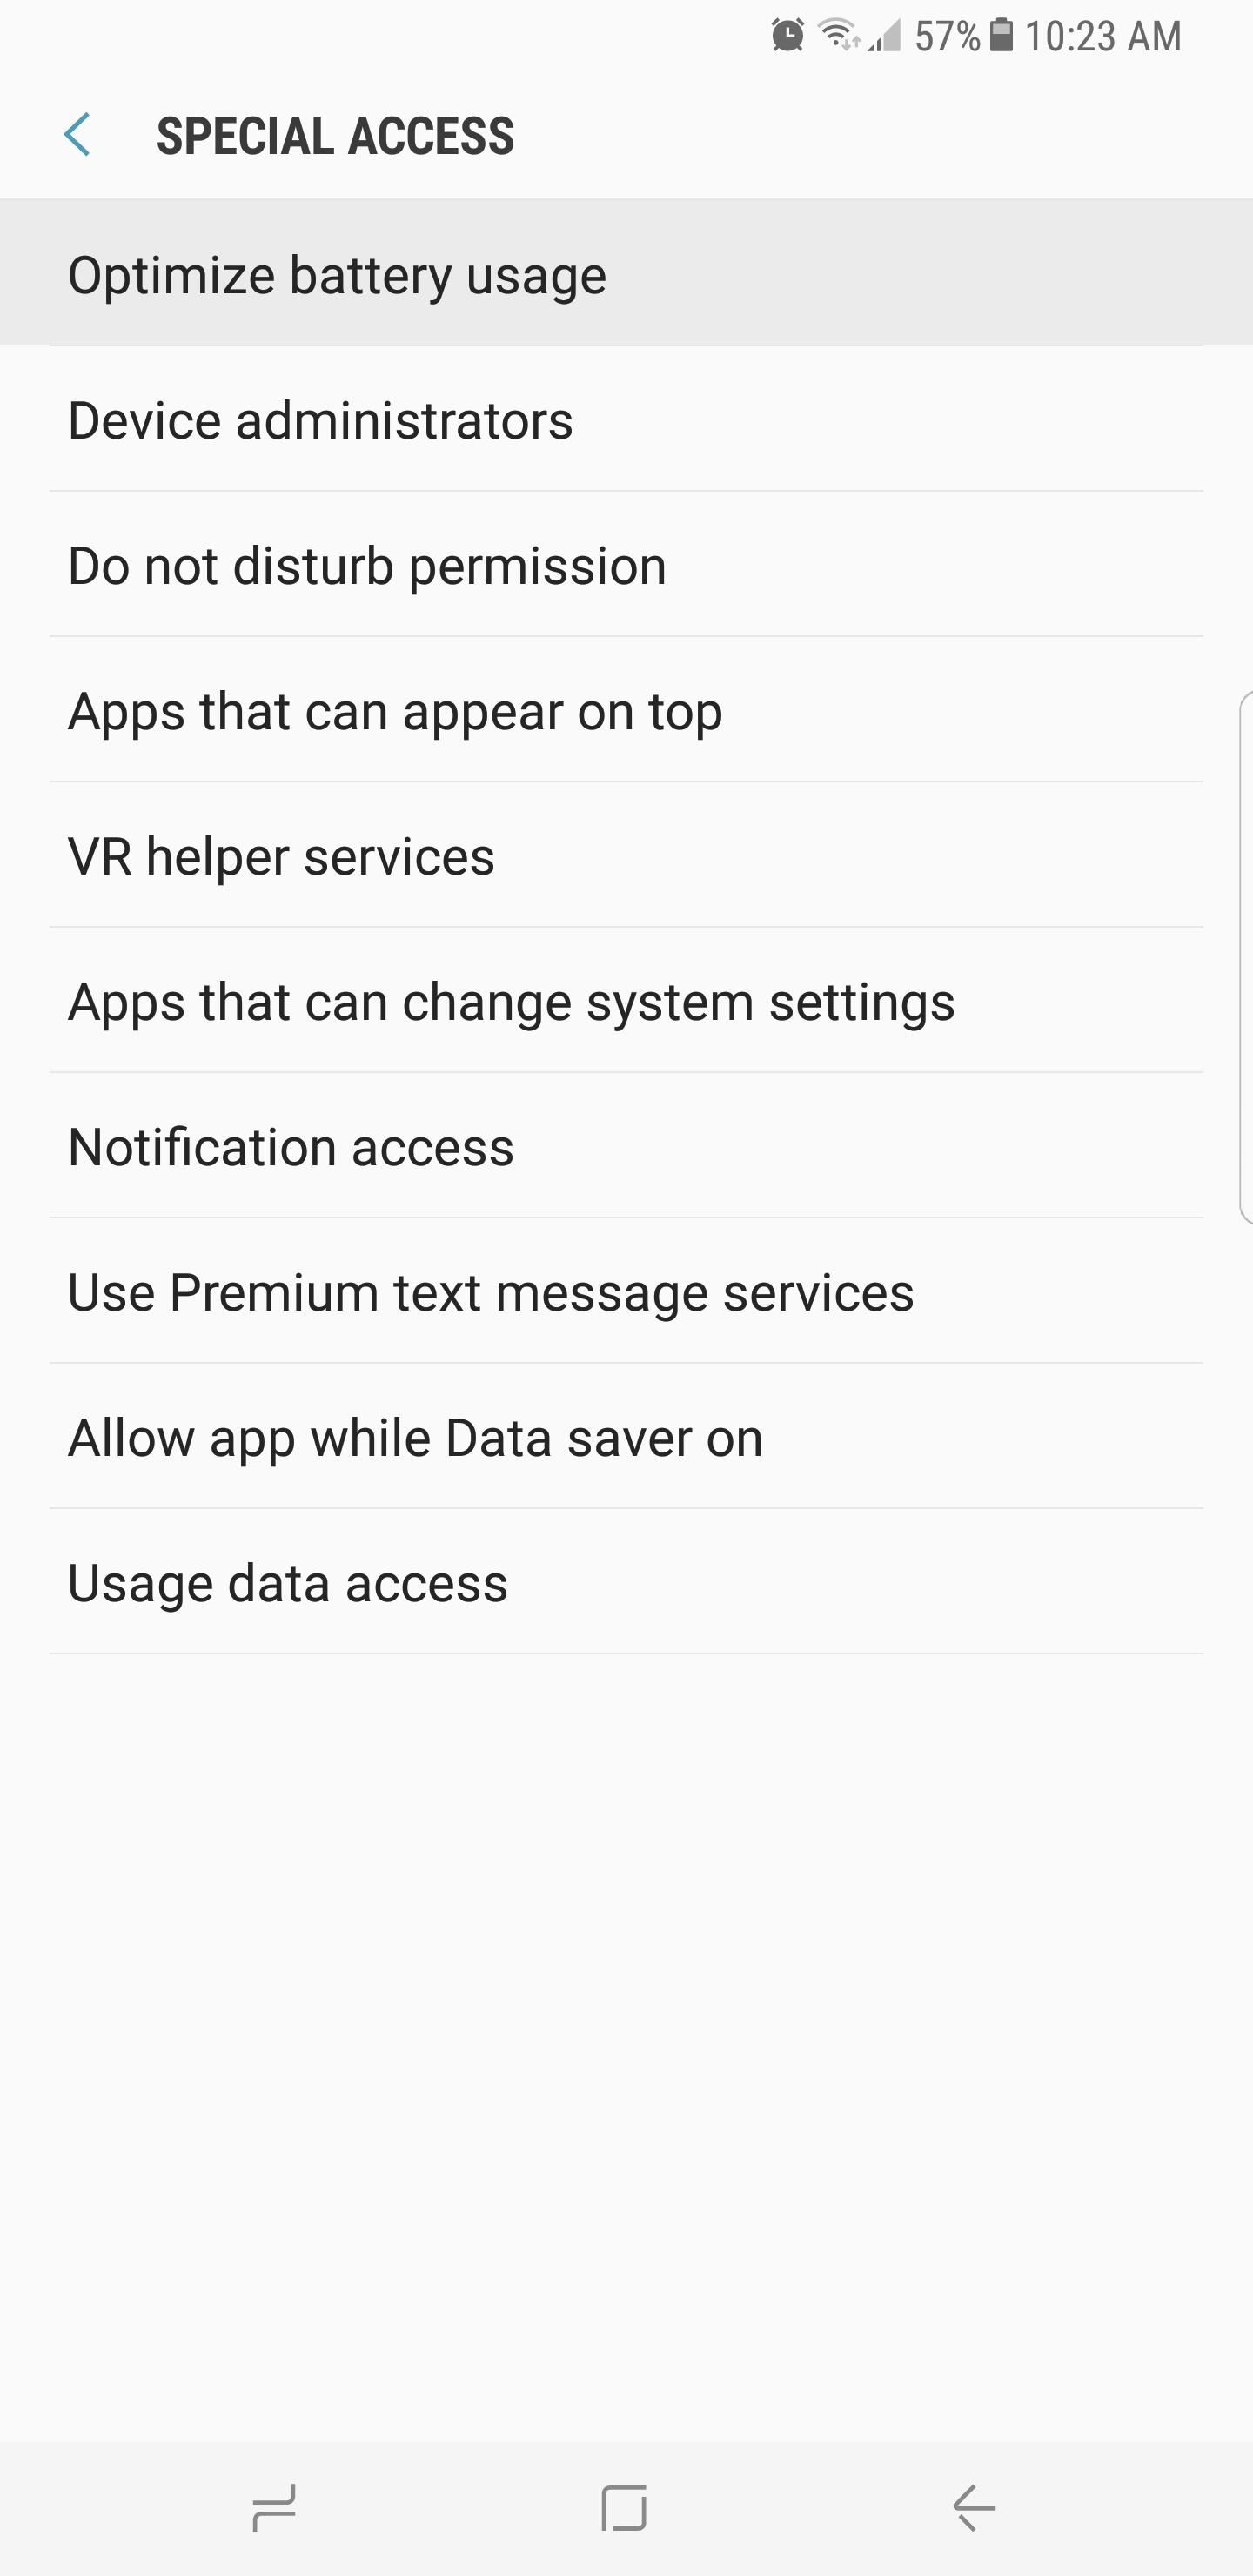 How to Fix Delayed Notifications on Your Galaxy S8 or S8+